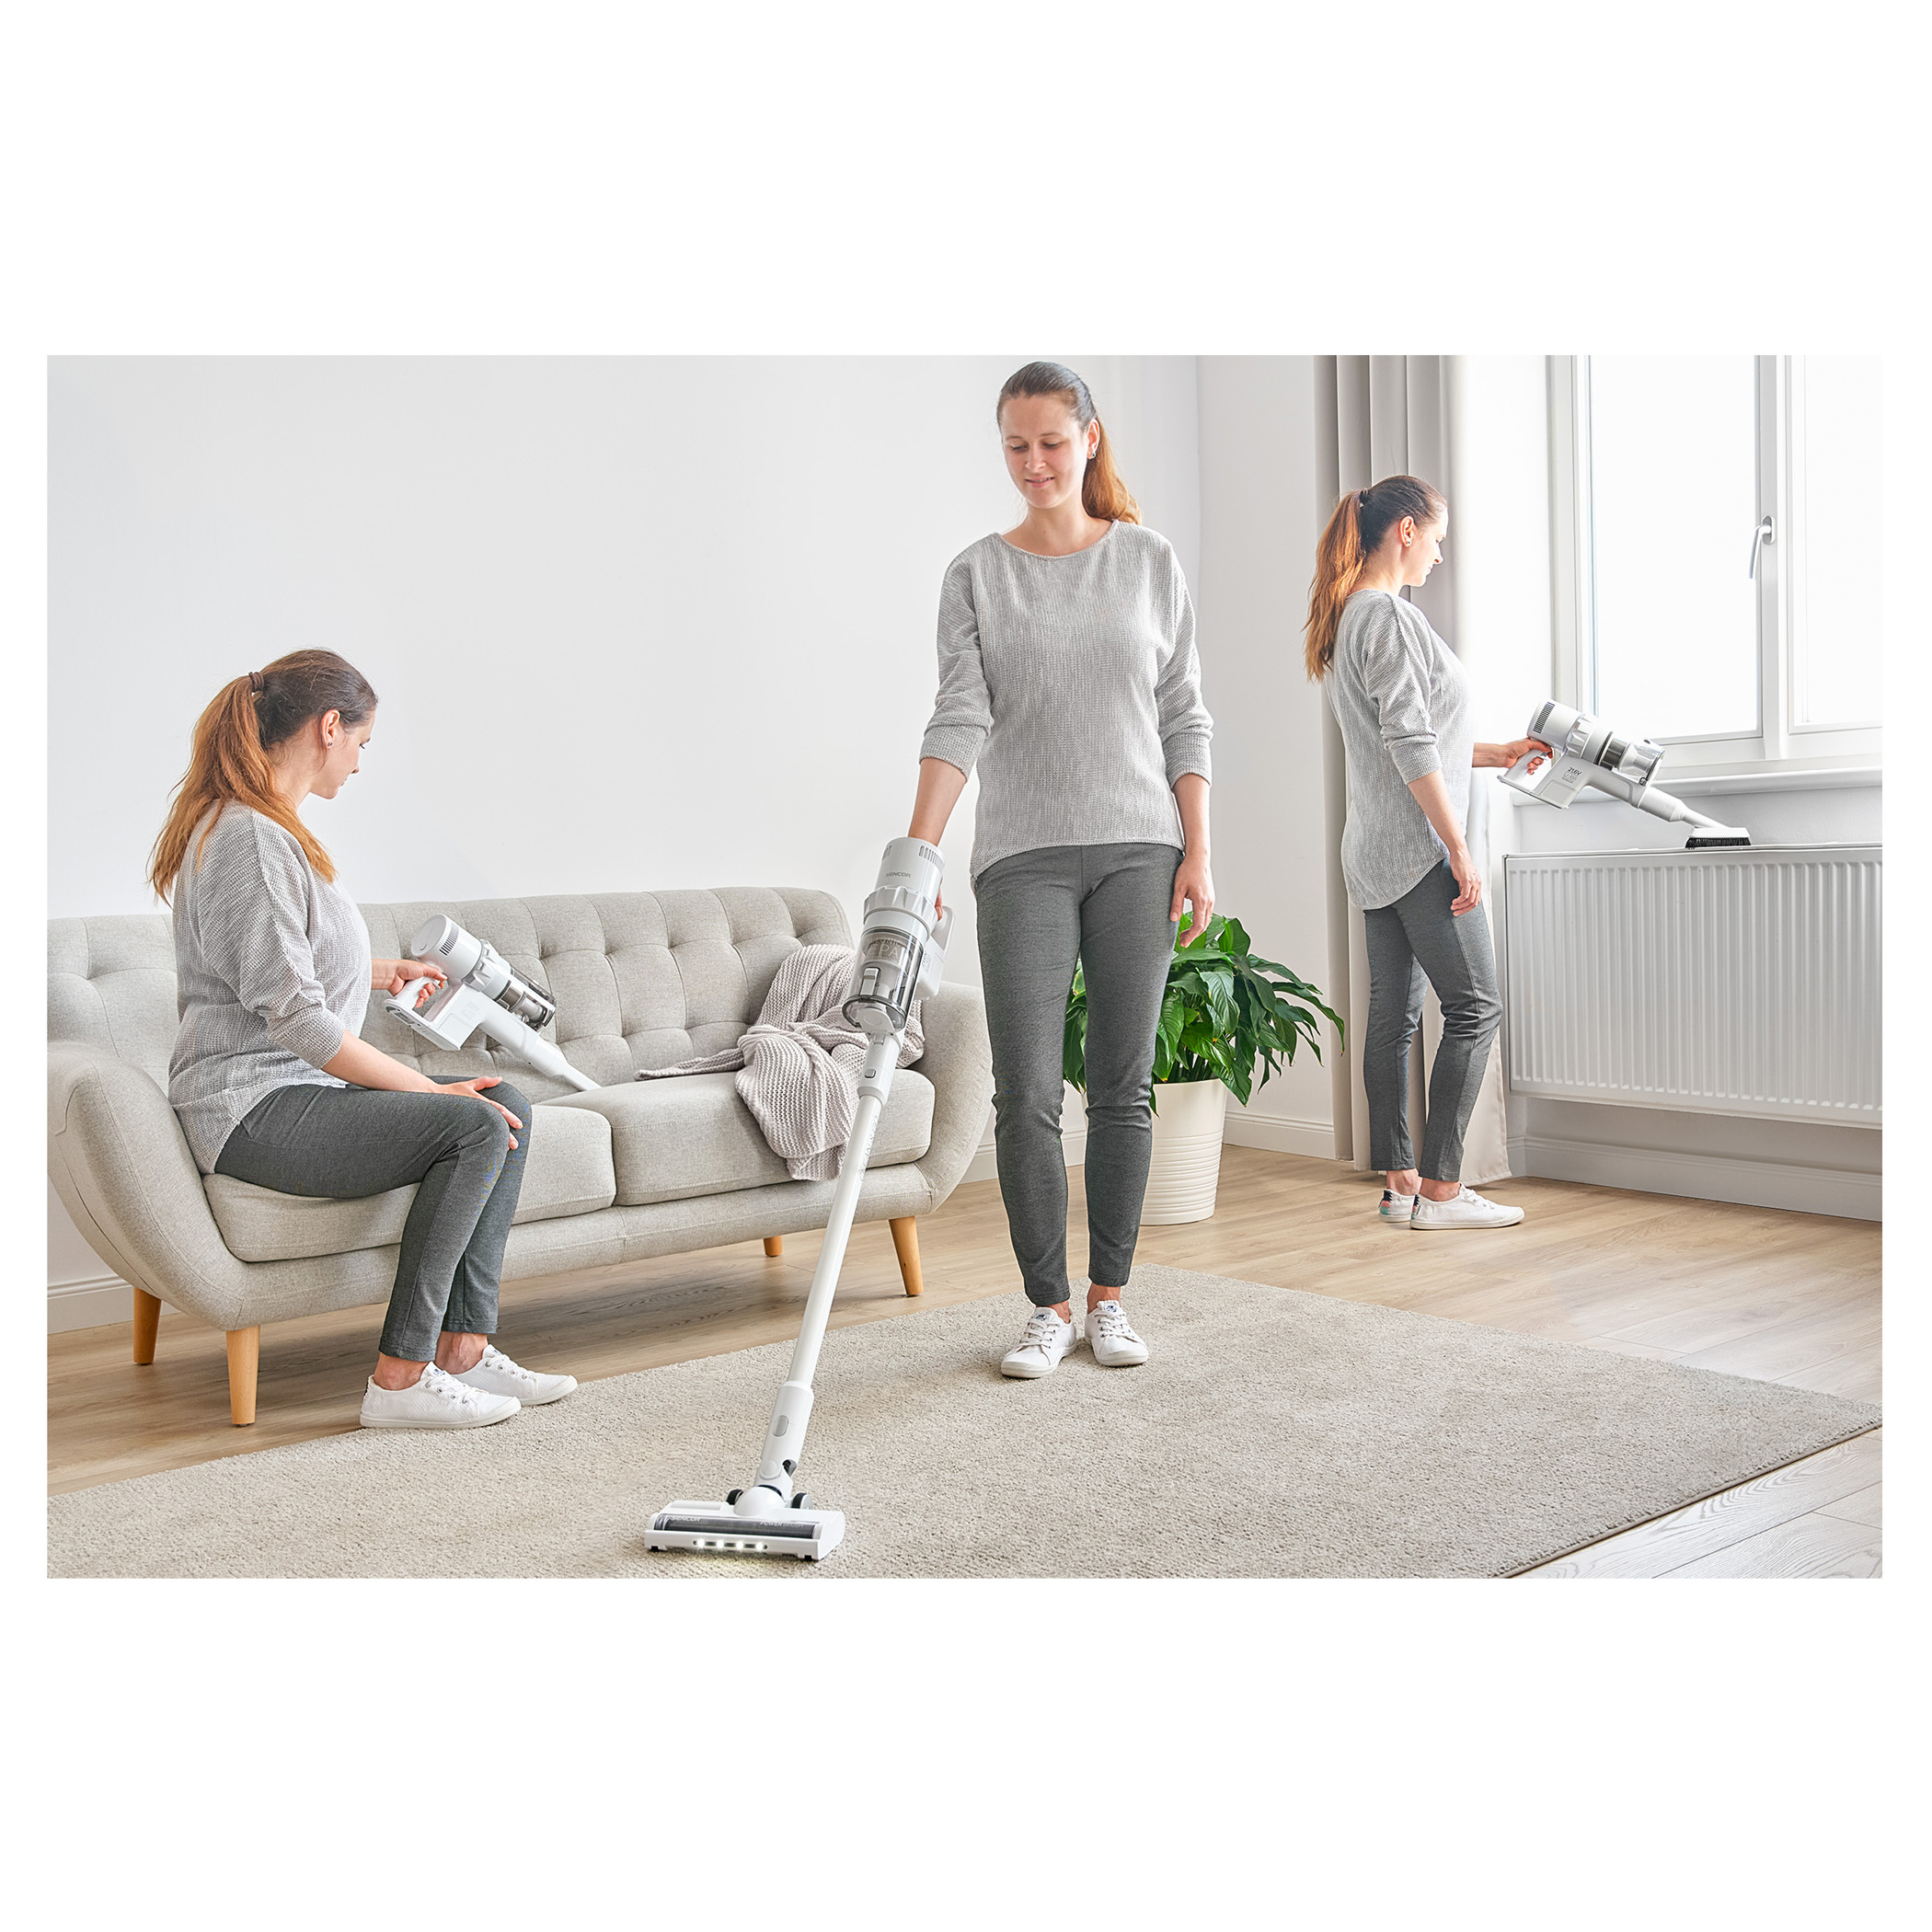 Collection vacuum cleaner – Dreame France